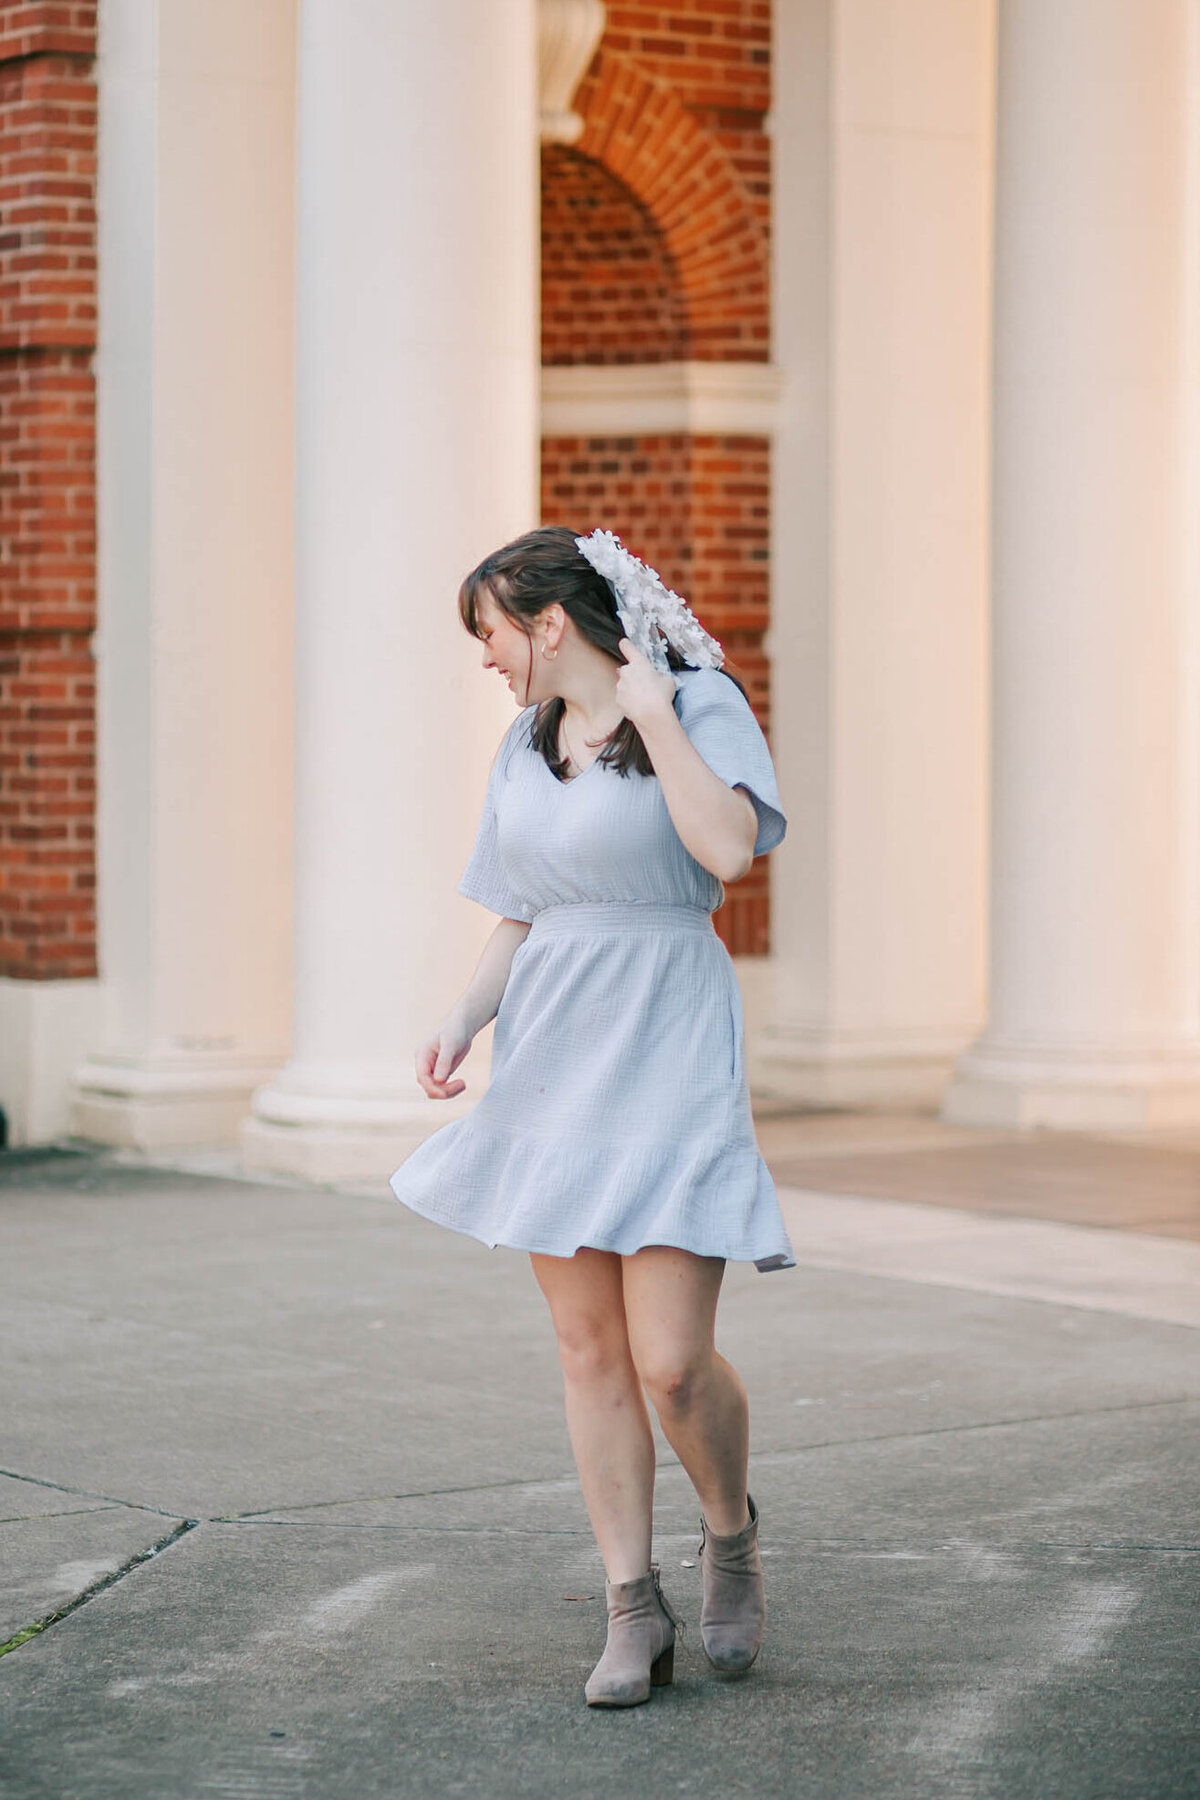 A girl in a blue dress looks down at the ground smiling